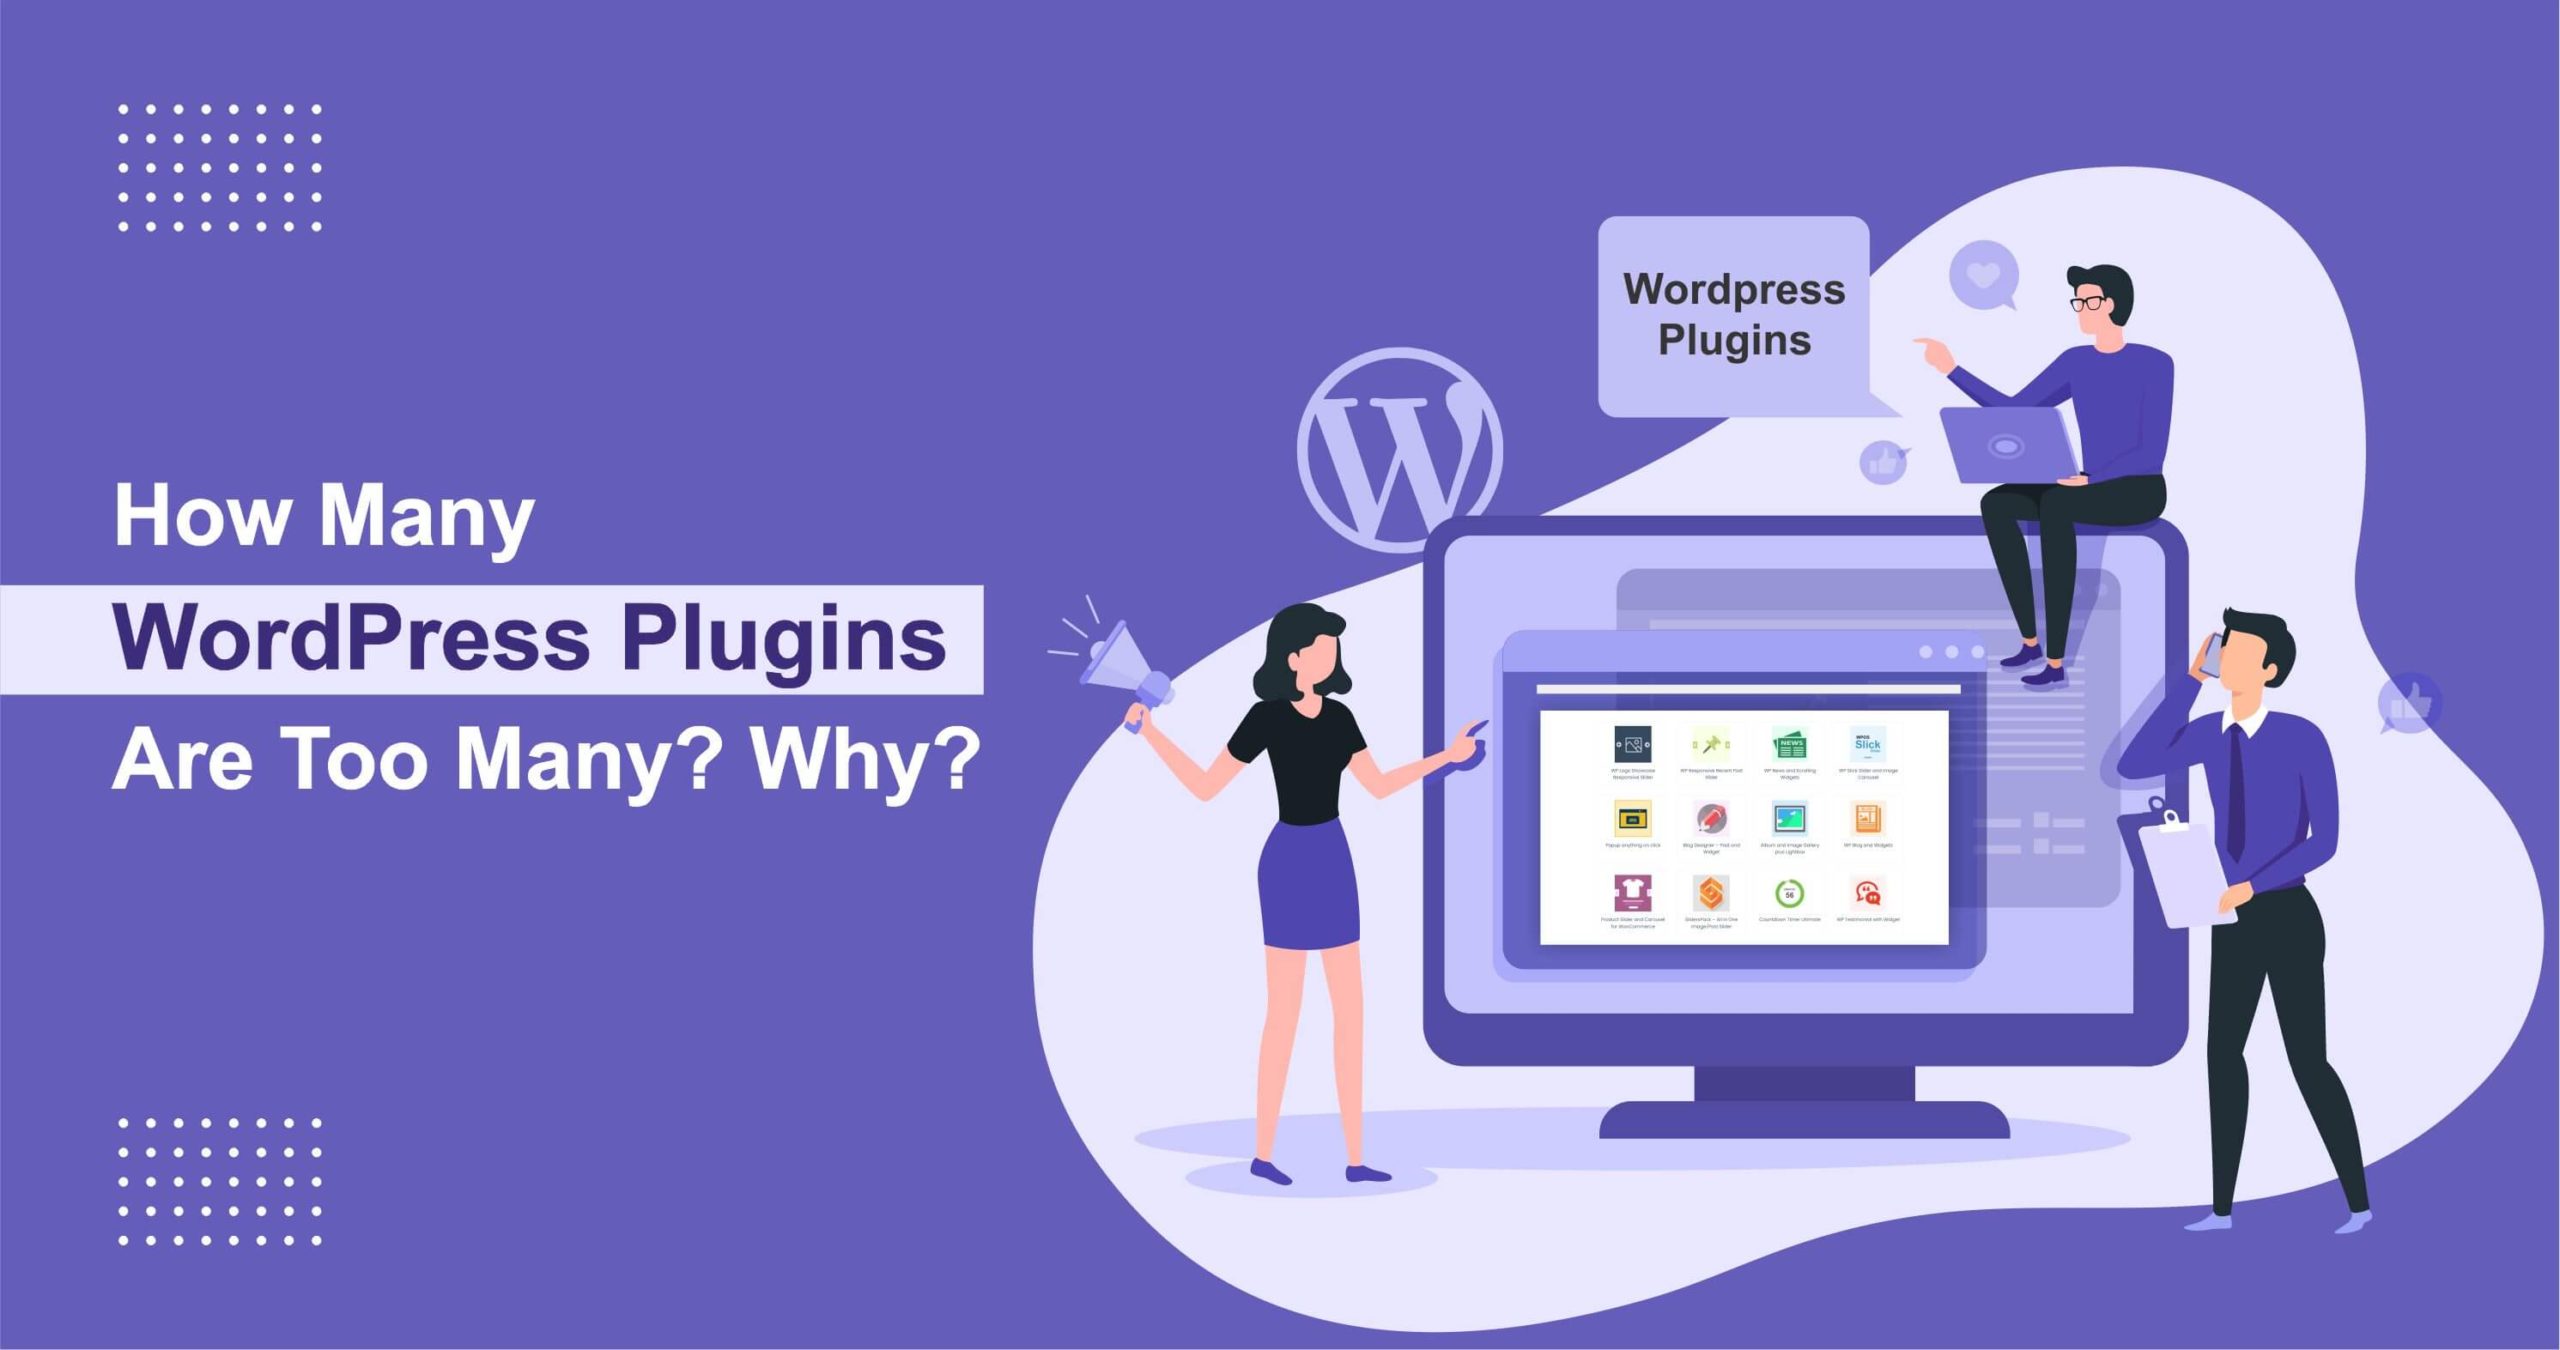 How Many WordPress Plugins Are Too Many